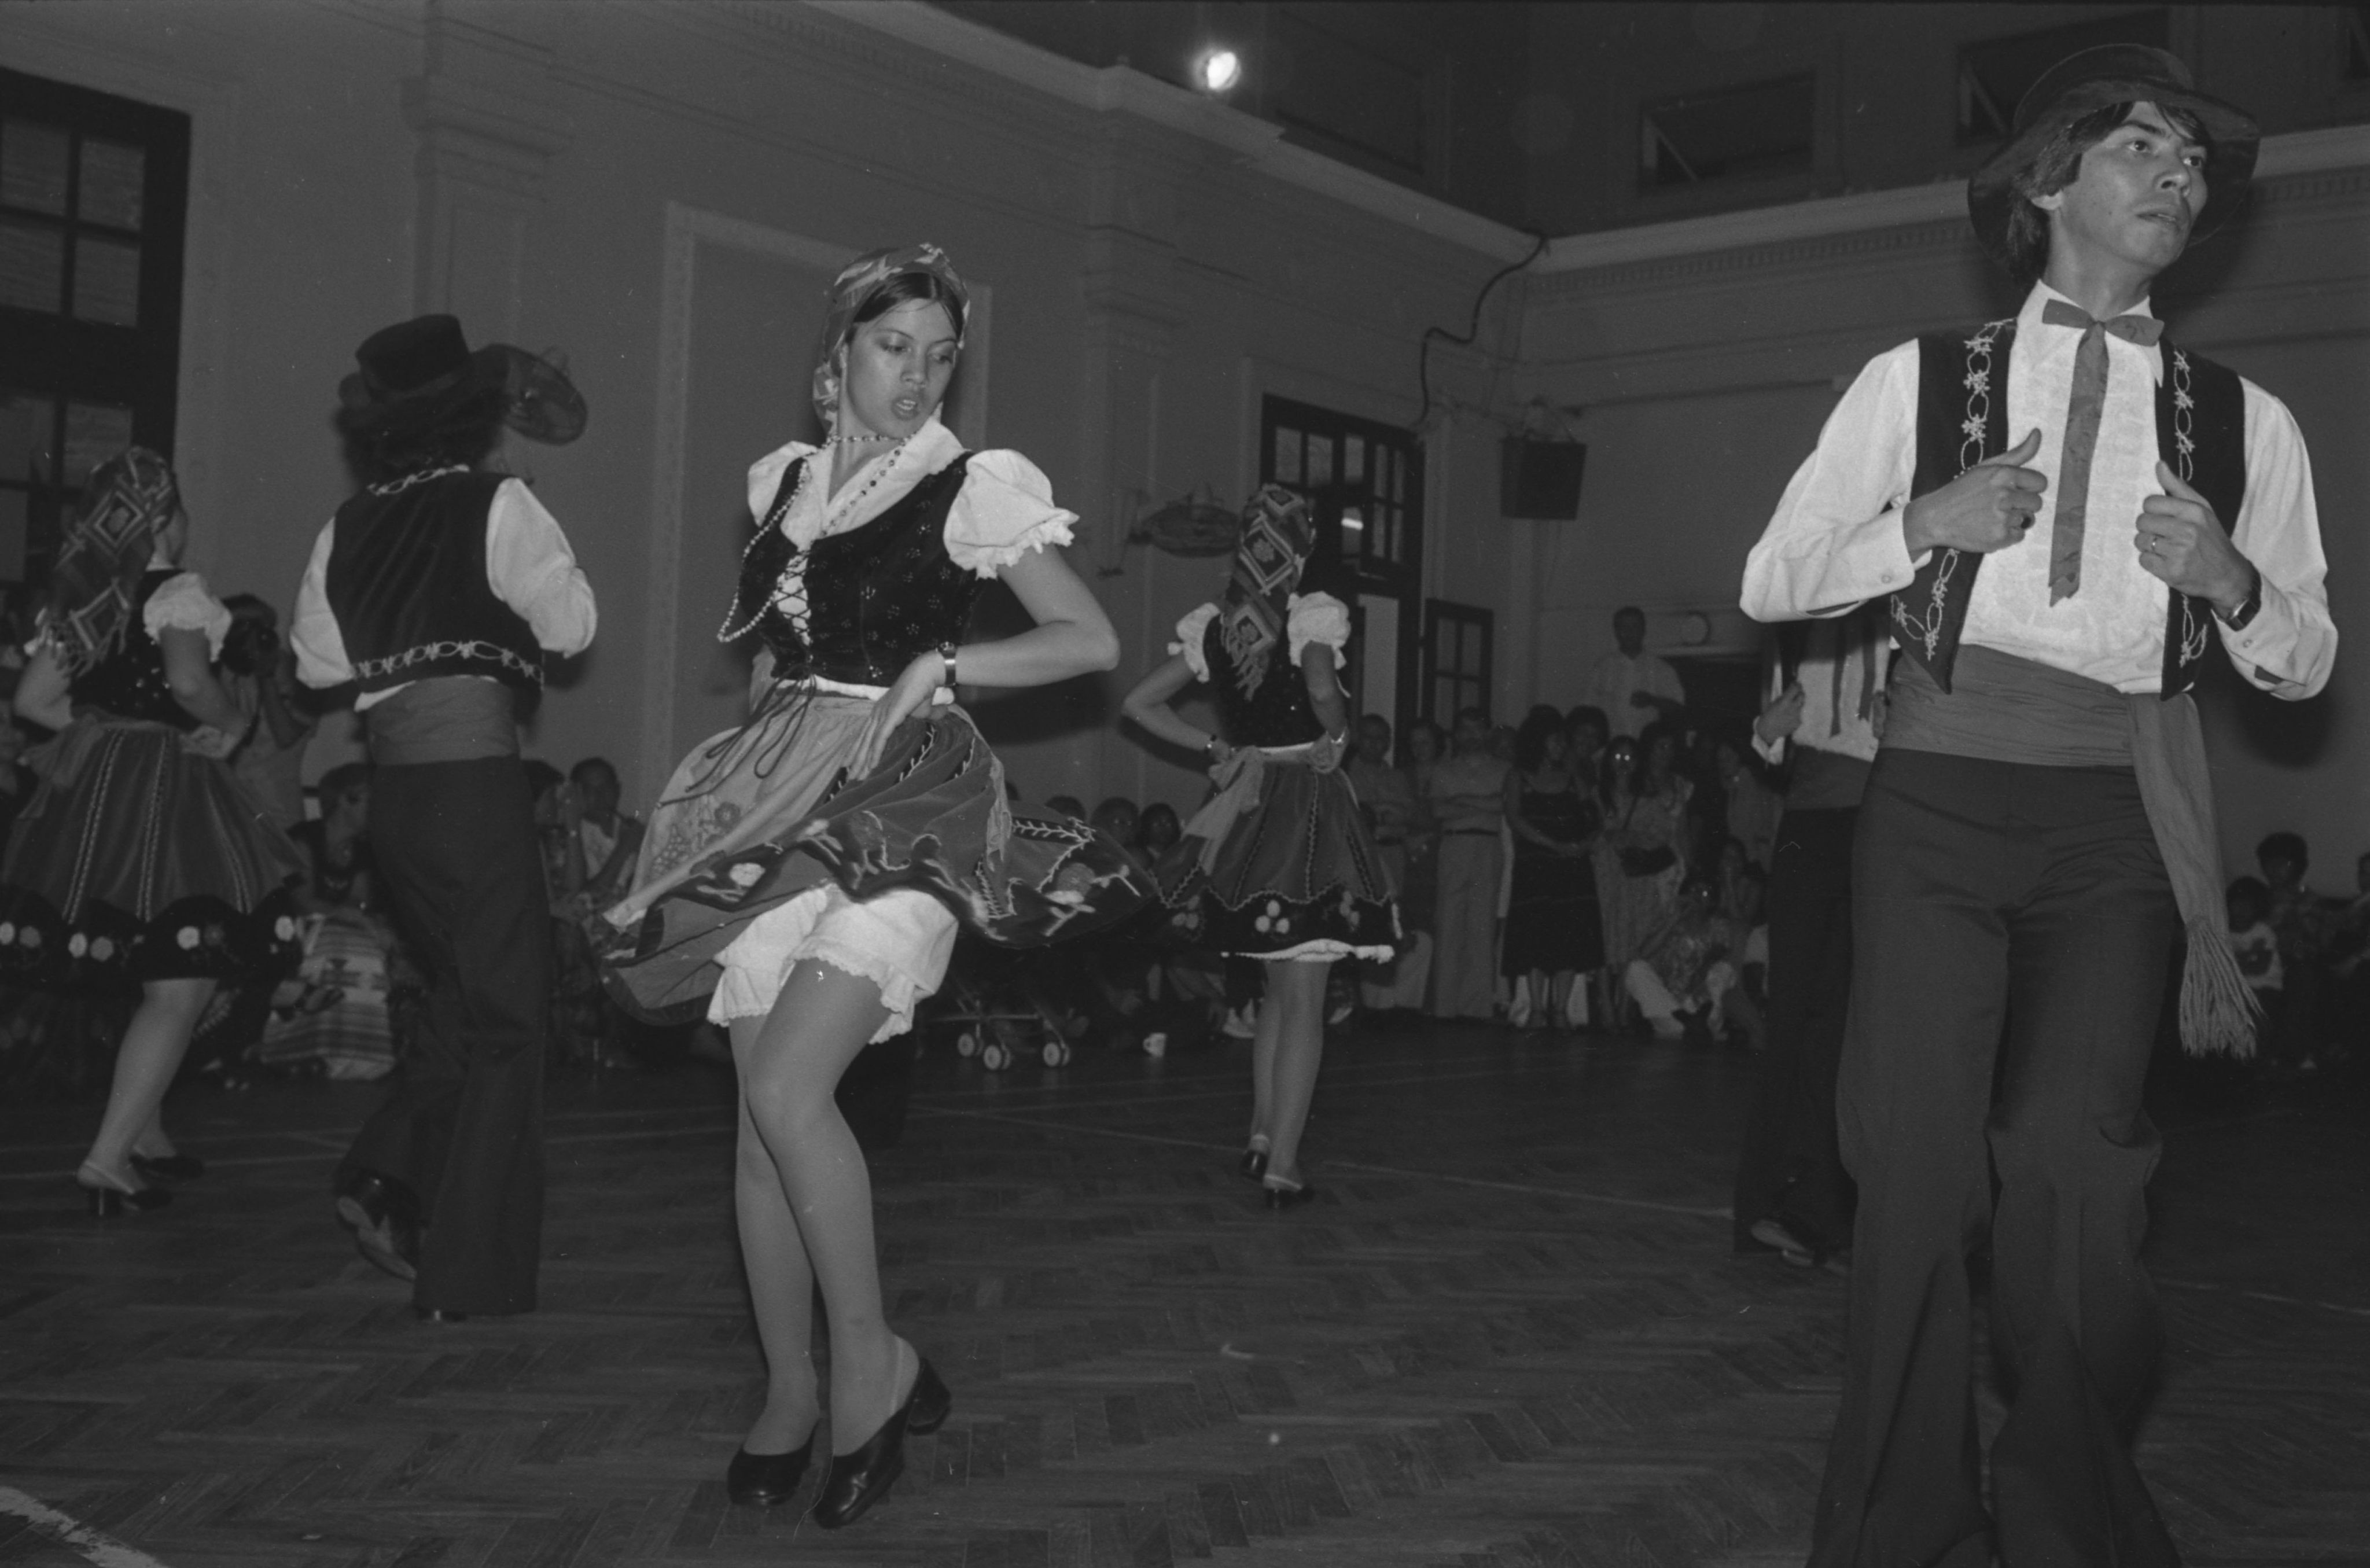 Hong Kong-based Portuguese celebrate their National Day with a folk dance at the Club de Recreio in 1978. Three decades earlier, a Portuguese diplomat, Eduardo Brazão, had little joy when he sought to encourage the Portuguese community to celebrate their culture more. Photo: SCMP